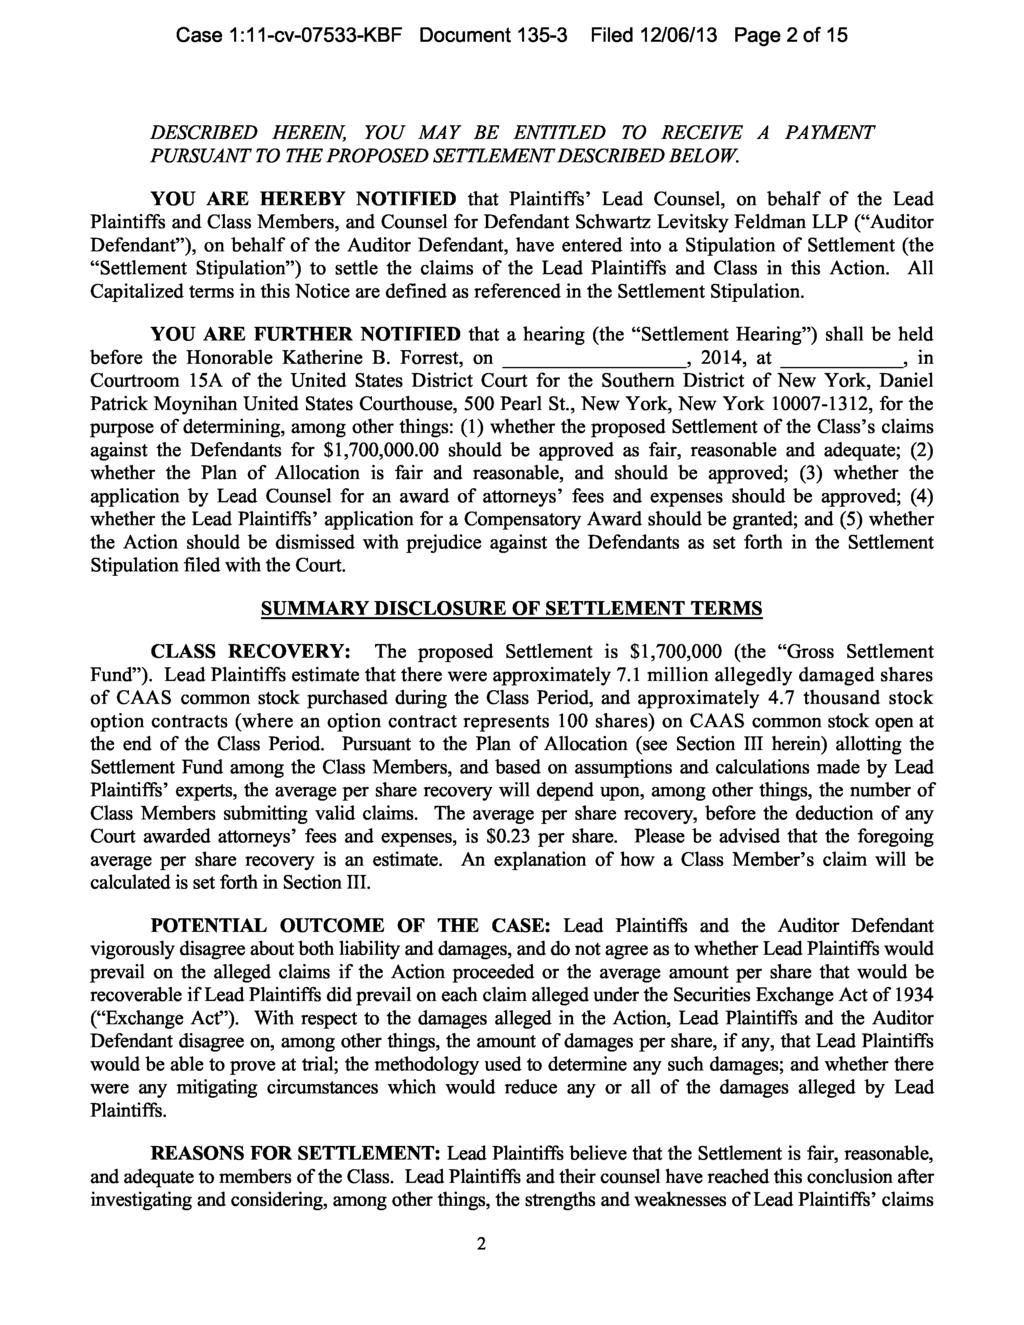 Case 1:11-cv-07533-KBF Document 135-3 Filed 12/06/13 Page 2 of 15 DESCRIBED HEREIN, YOU MAY BE ENTITLED TO RECEIVE A PAYMENT PURSUANT TO THE PROPOSED SETTLEMENT DESCRIBED BELOW.